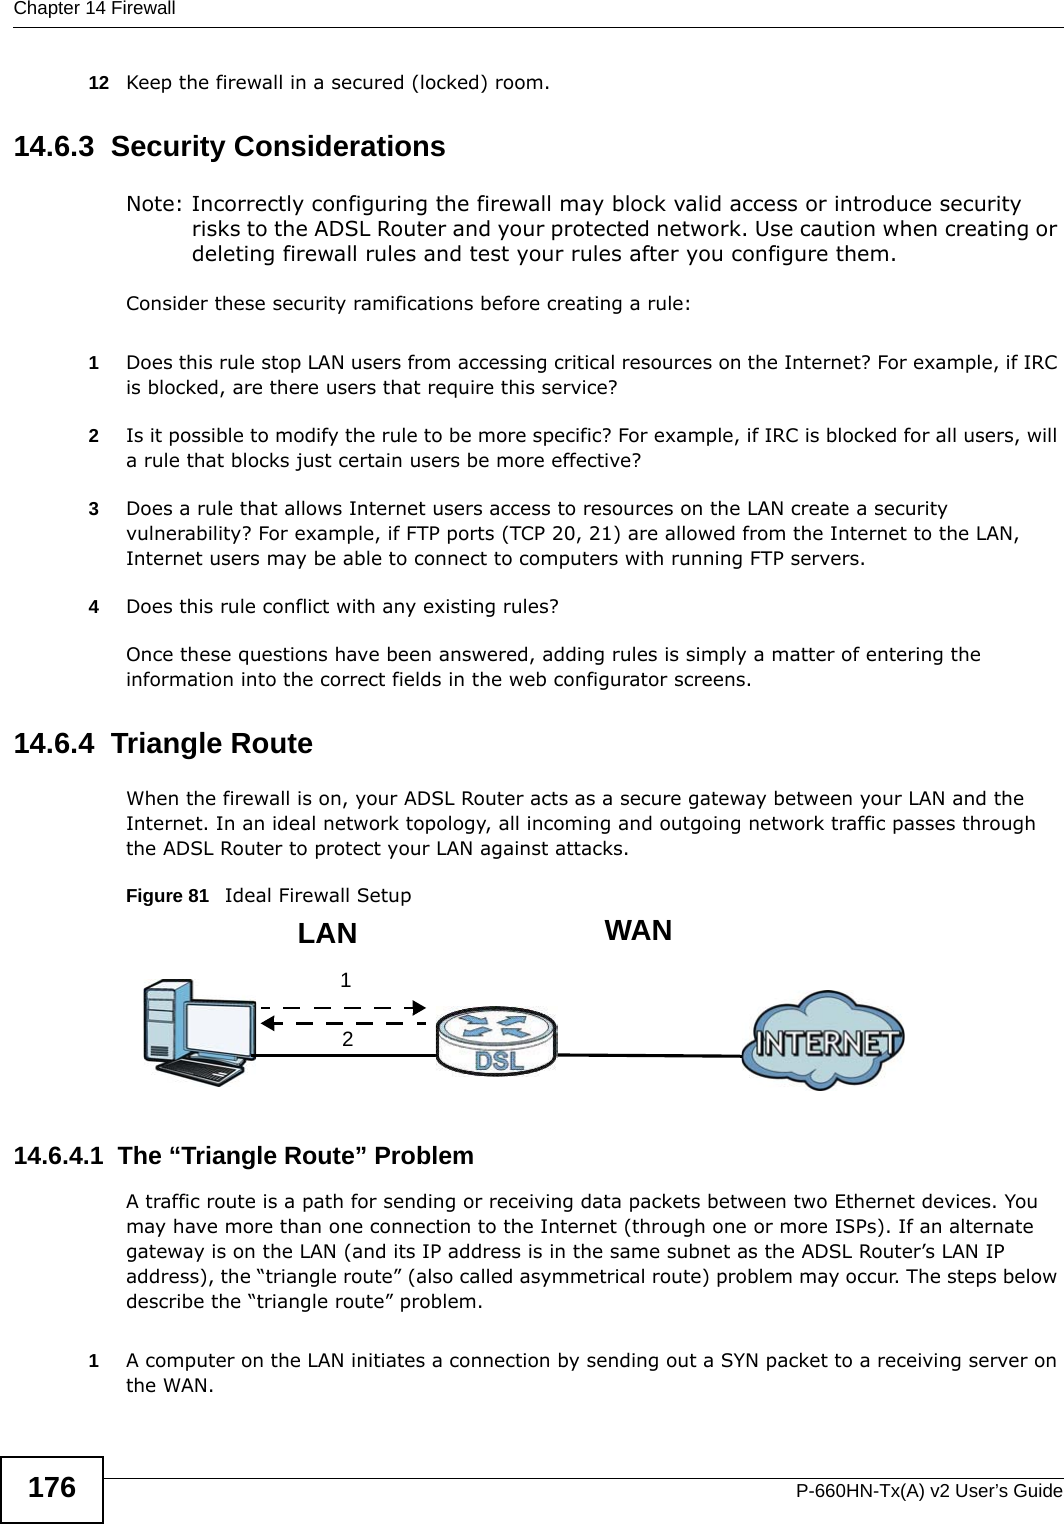 Chapter 14 FirewallP-660HN-Tx(A) v2 User’s Guide17612 Keep the firewall in a secured (locked) room.14.6.3  Security ConsiderationsNote: Incorrectly configuring the firewall may block valid access or introduce security risks to the ADSL Router and your protected network. Use caution when creating or deleting firewall rules and test your rules after you configure them.Consider these security ramifications before creating a rule:1Does this rule stop LAN users from accessing critical resources on the Internet? For example, if IRC is blocked, are there users that require this service?2Is it possible to modify the rule to be more specific? For example, if IRC is blocked for all users, will a rule that blocks just certain users be more effective?3Does a rule that allows Internet users access to resources on the LAN create a security vulnerability? For example, if FTP ports (TCP 20, 21) are allowed from the Internet to the LAN, Internet users may be able to connect to computers with running FTP servers.4Does this rule conflict with any existing rules?Once these questions have been answered, adding rules is simply a matter of entering the information into the correct fields in the web configurator screens.14.6.4  Triangle RouteWhen the firewall is on, your ADSL Router acts as a secure gateway between your LAN and the Internet. In an ideal network topology, all incoming and outgoing network traffic passes through the ADSL Router to protect your LAN against attacks.Figure 81   Ideal Firewall Setup14.6.4.1  The “Triangle Route” ProblemA traffic route is a path for sending or receiving data packets between two Ethernet devices. You may have more than one connection to the Internet (through one or more ISPs). If an alternate gateway is on the LAN (and its IP address is in the same subnet as the ADSL Router’s LAN IP address), the “triangle route” (also called asymmetrical route) problem may occur. The steps below describe the “triangle route” problem. 1A computer on the LAN initiates a connection by sending out a SYN packet to a receiving server on the WAN.12WANLAN